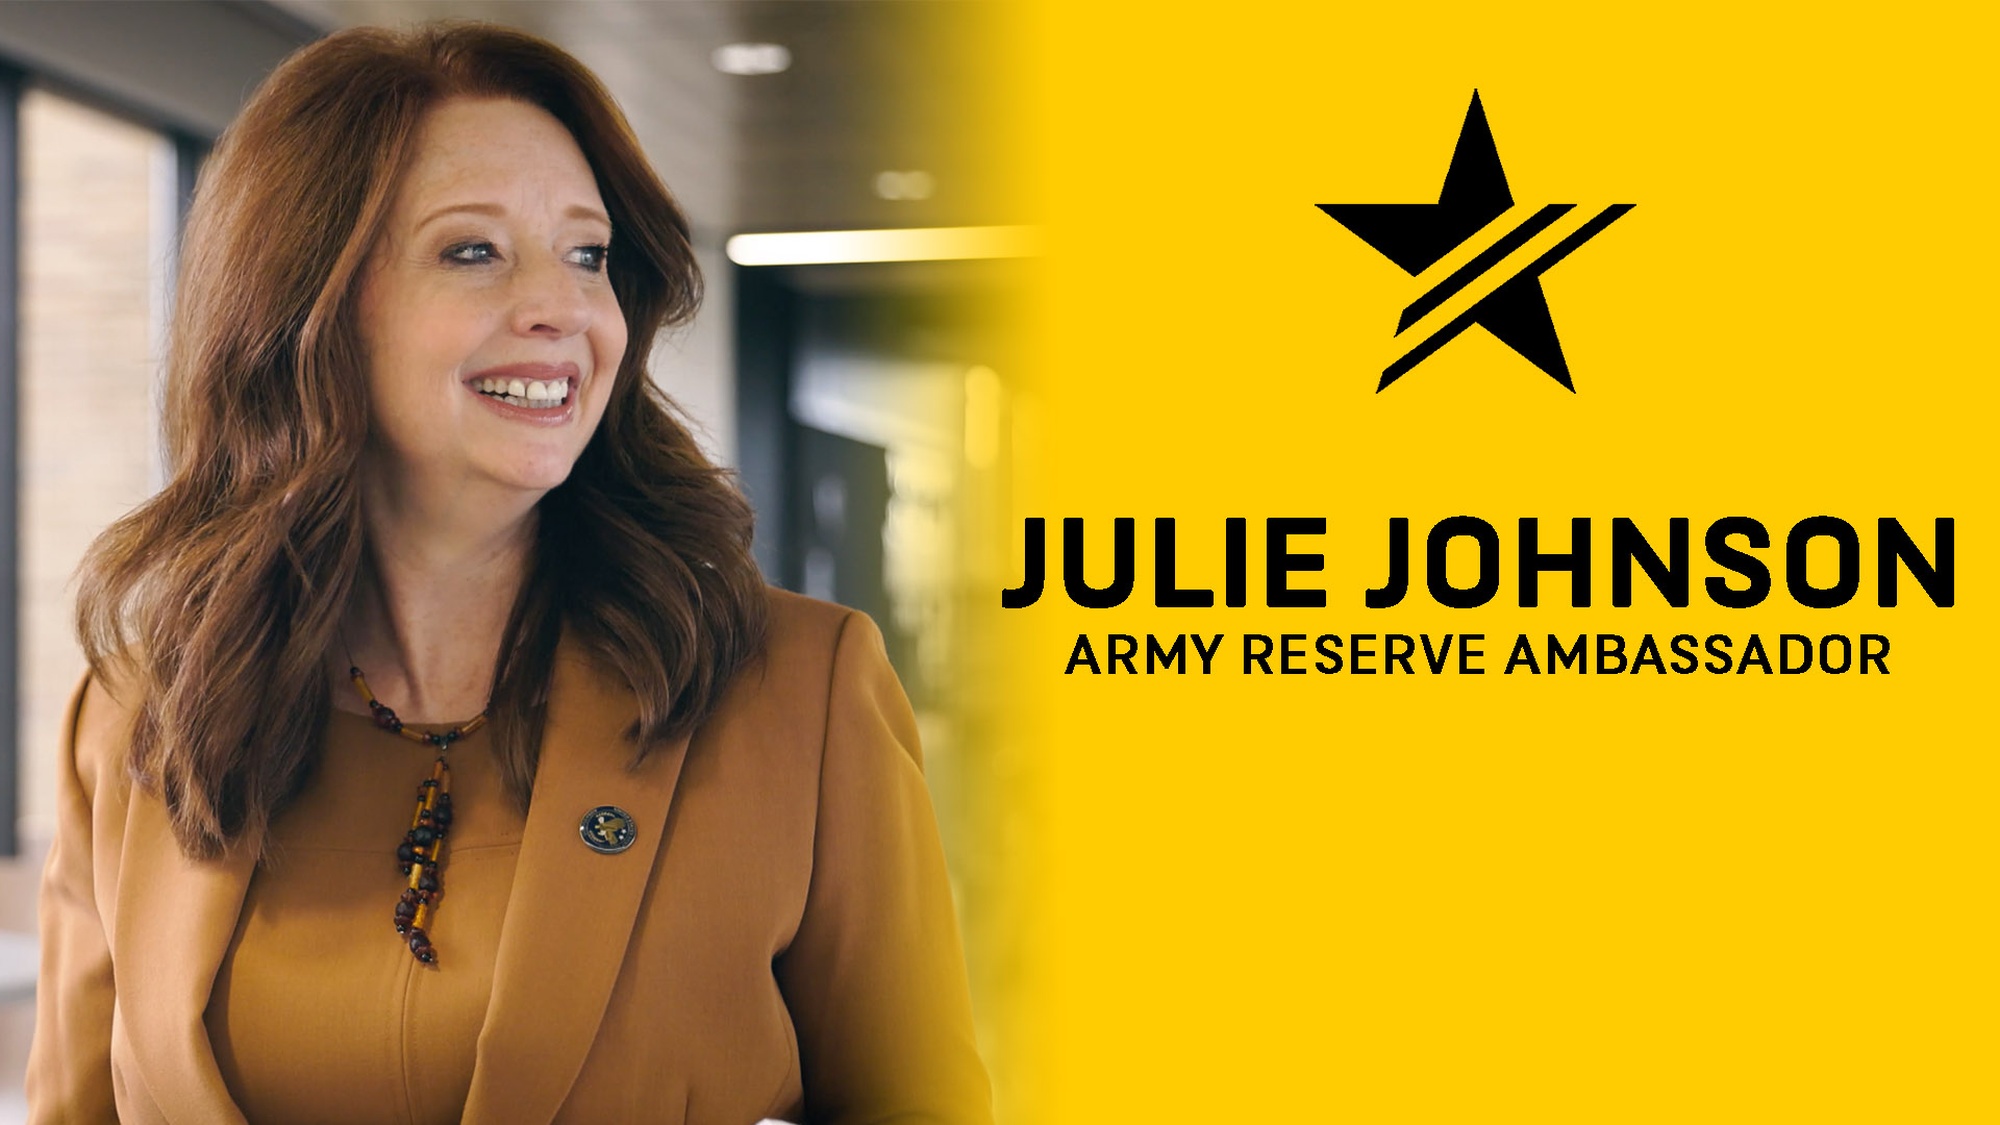 Illinois Army Reserve Ambassador Julie Johnson shares her story about how you can still serve your country as an Ambassador, even without prior military service history. 

Her grandfather was a great motivator for her, and she talks about how being an ARA is her way of honoring him since his passing. 

As a chiropractor, she shares how her passion for helping others goes hand in hand with her role as an ambassador, and encourages other like-minded individuals to consider this path.

Directed By: Tim Yao
Camera: Colton Huston